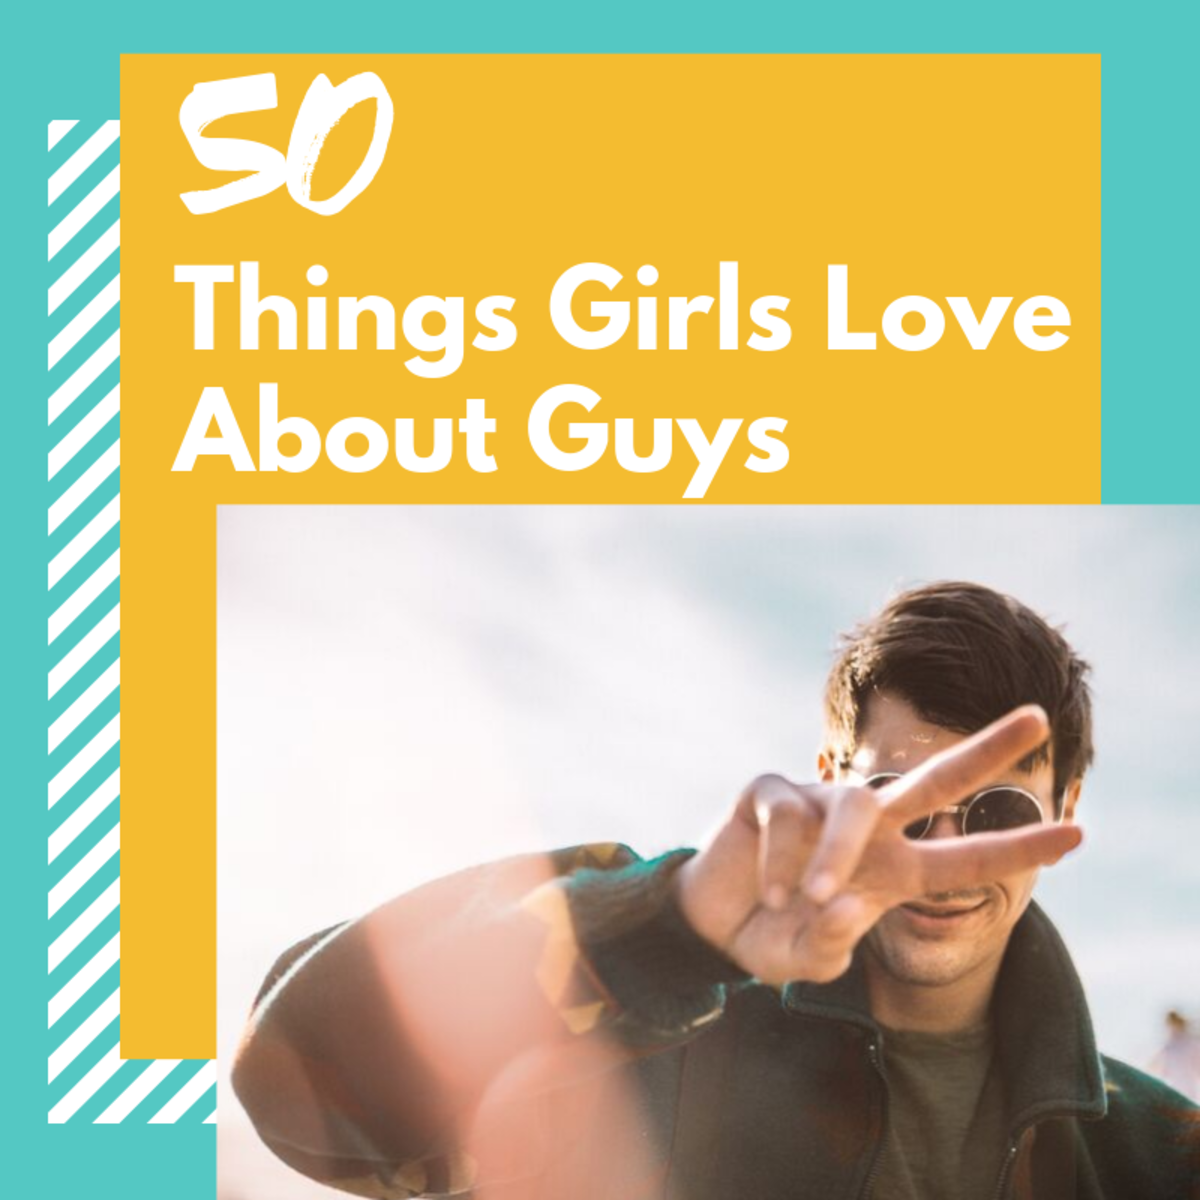 50 Thinks Girls Love About Guys